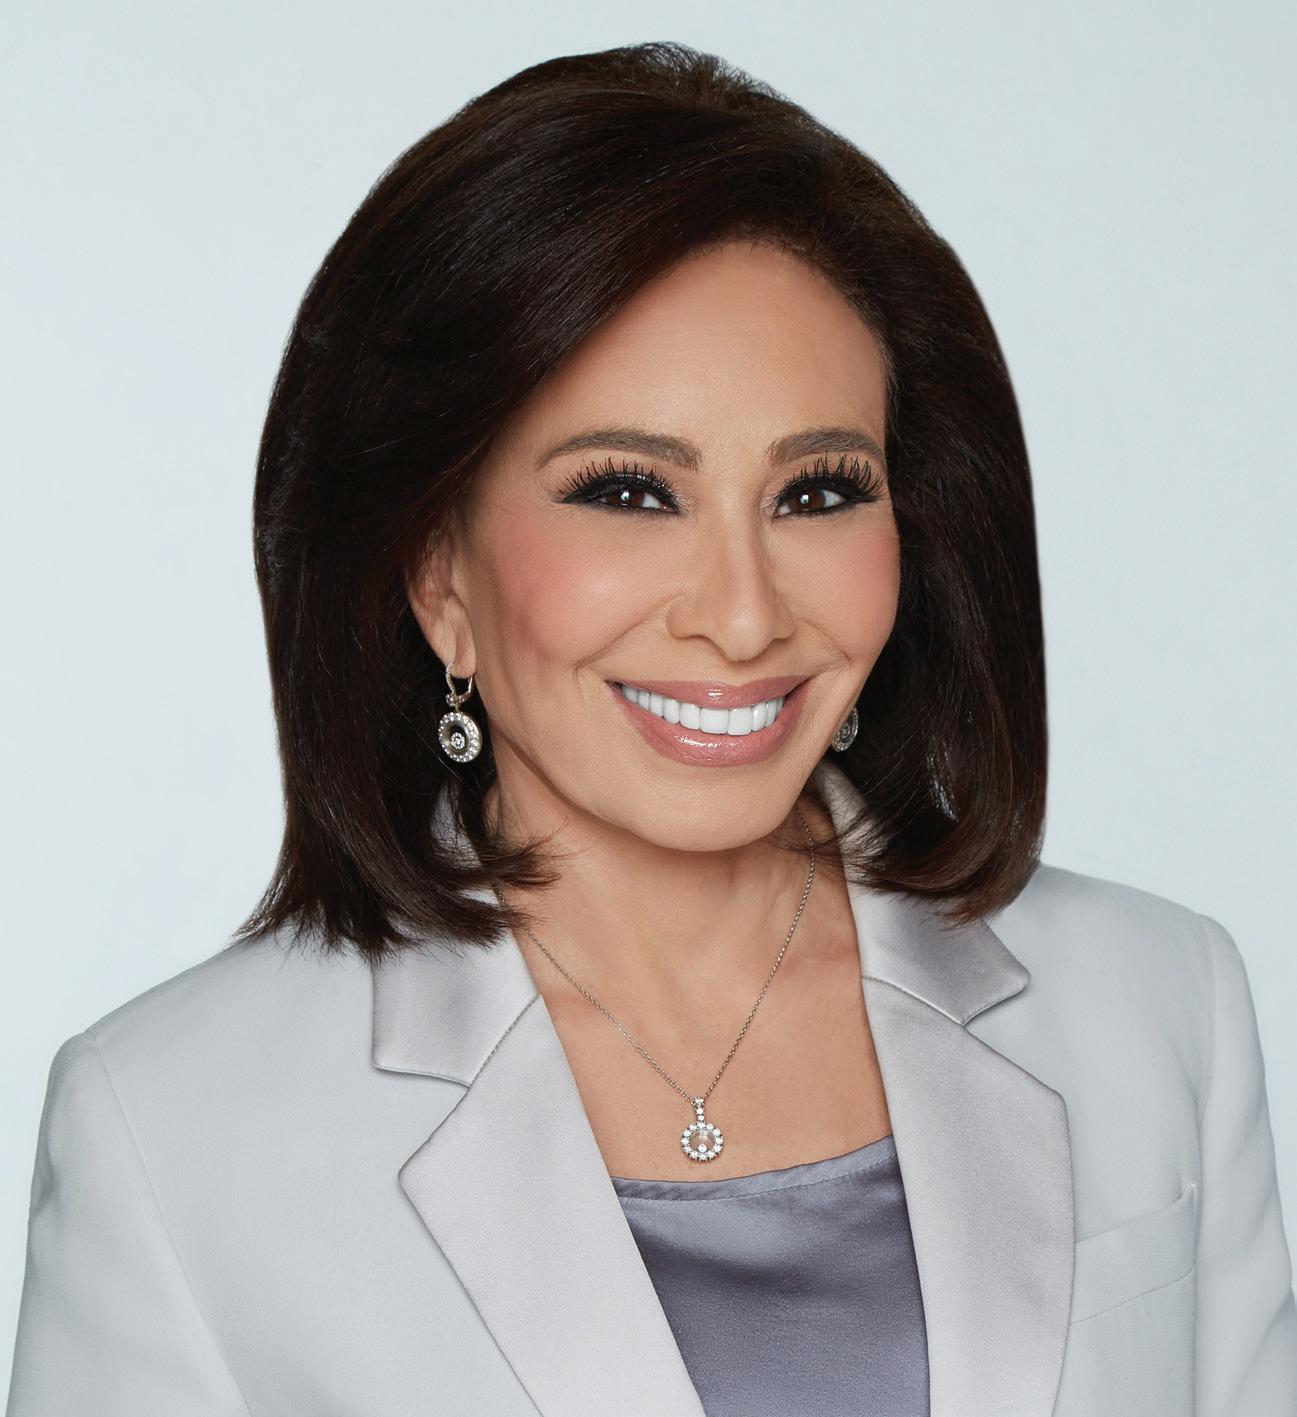 connie nunley recommends judge jeanine pirro tits pic